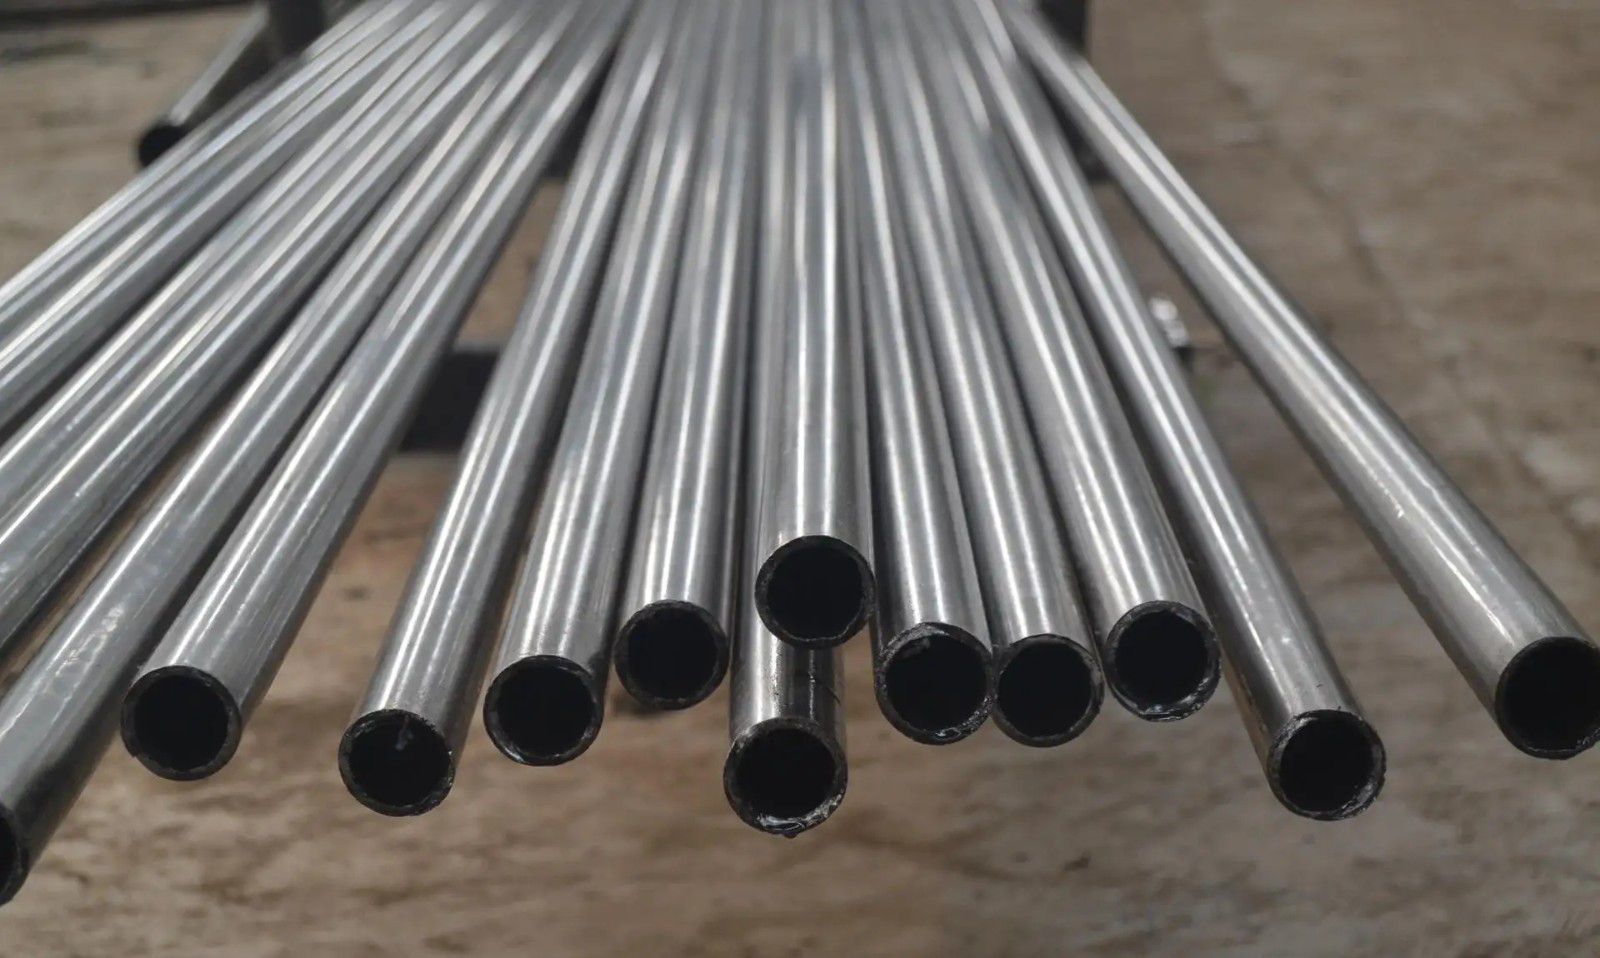 Singapore201 stainless steel pipe directly supplied by the manufacturerIntroduction to the basic types of